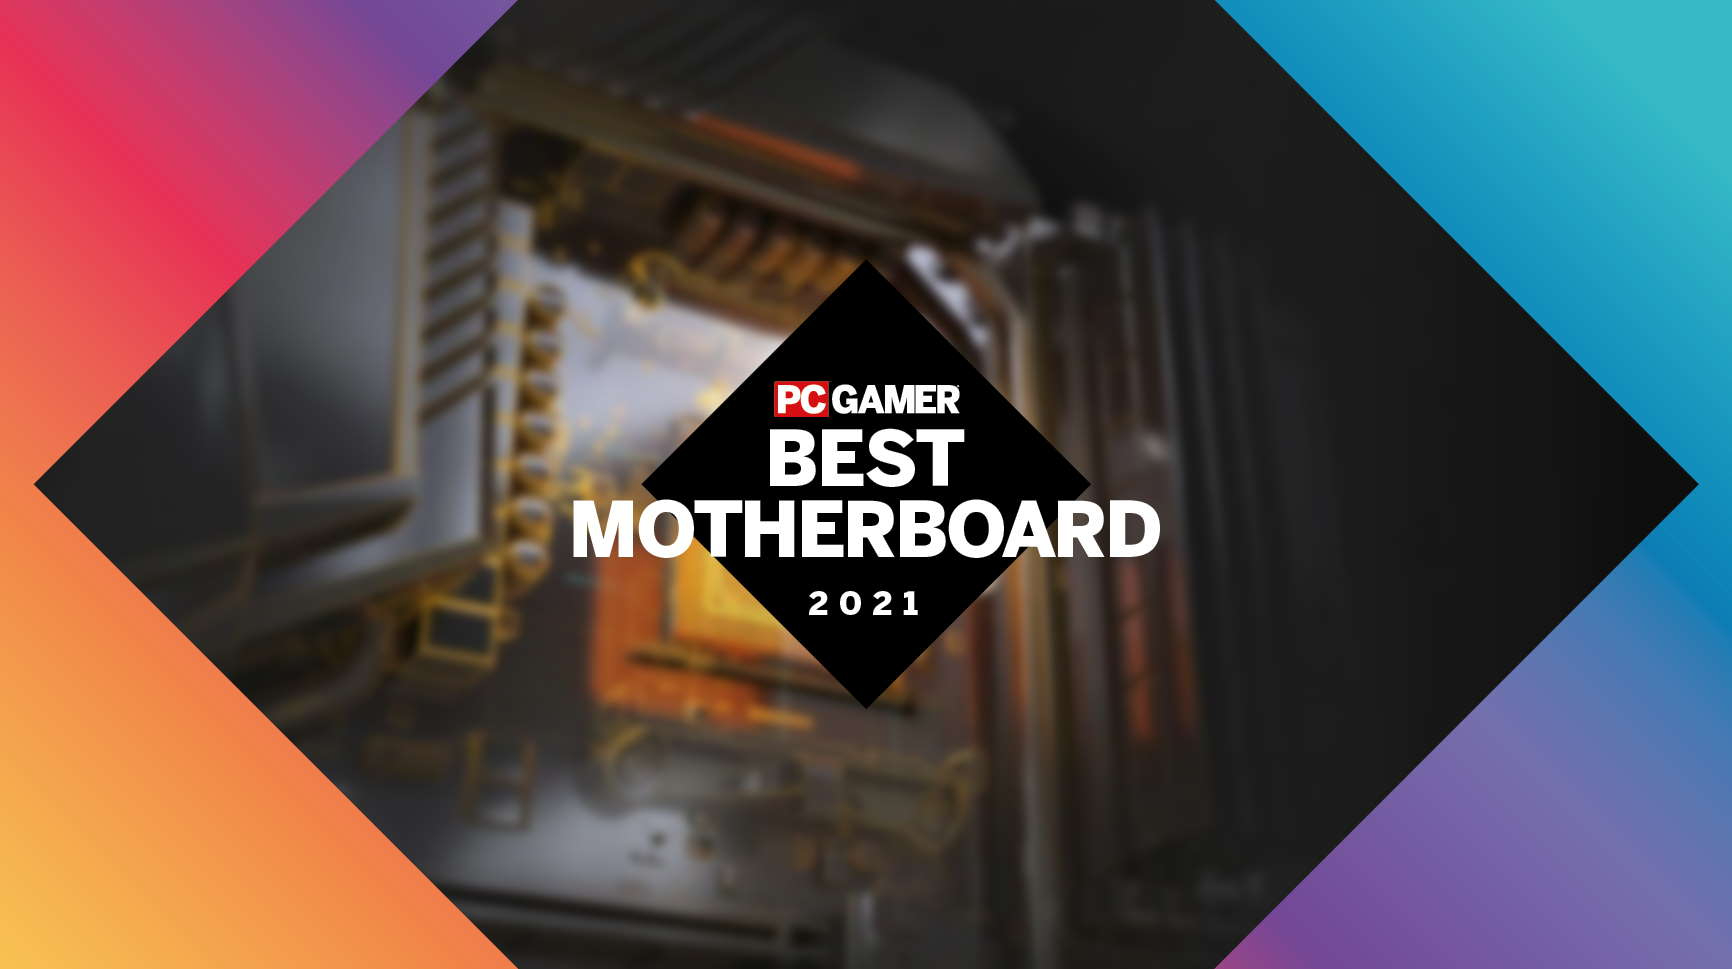  PC Gamer Hardware Awards: What is the best motherboard of 2021? 